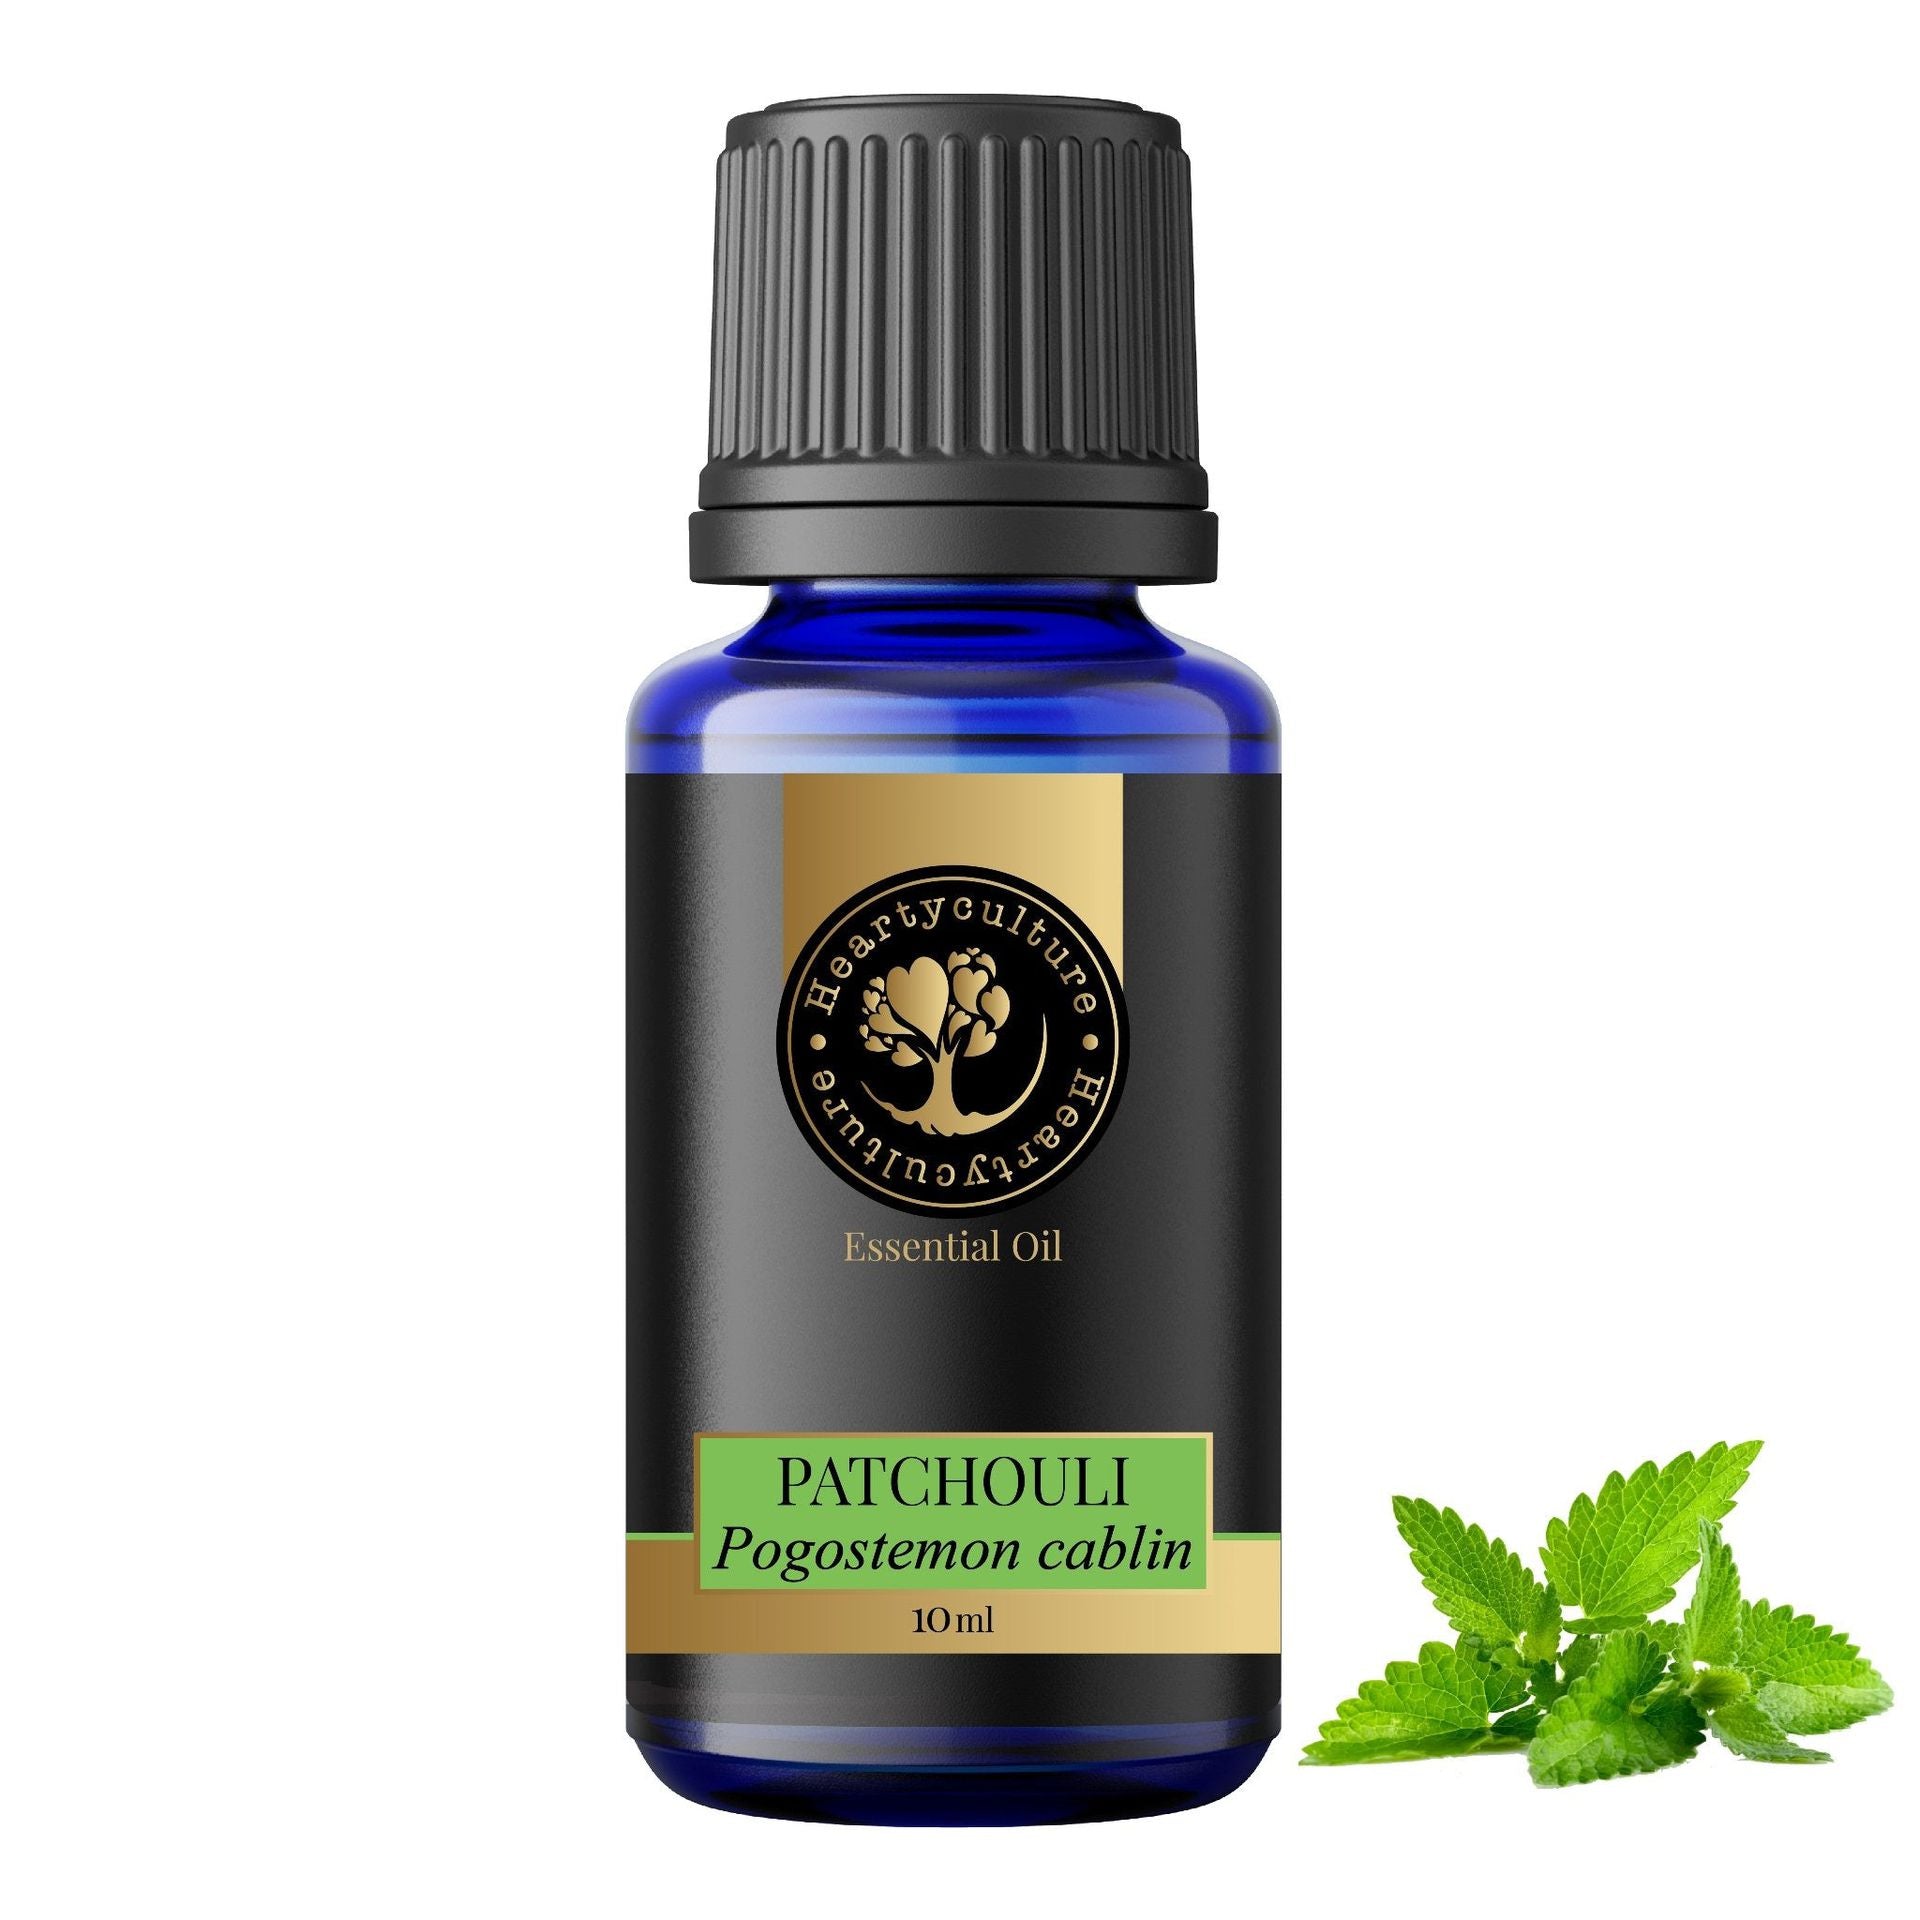 Heartyculture Patchouli Essential Oil - 10 ml - hfnl!fe